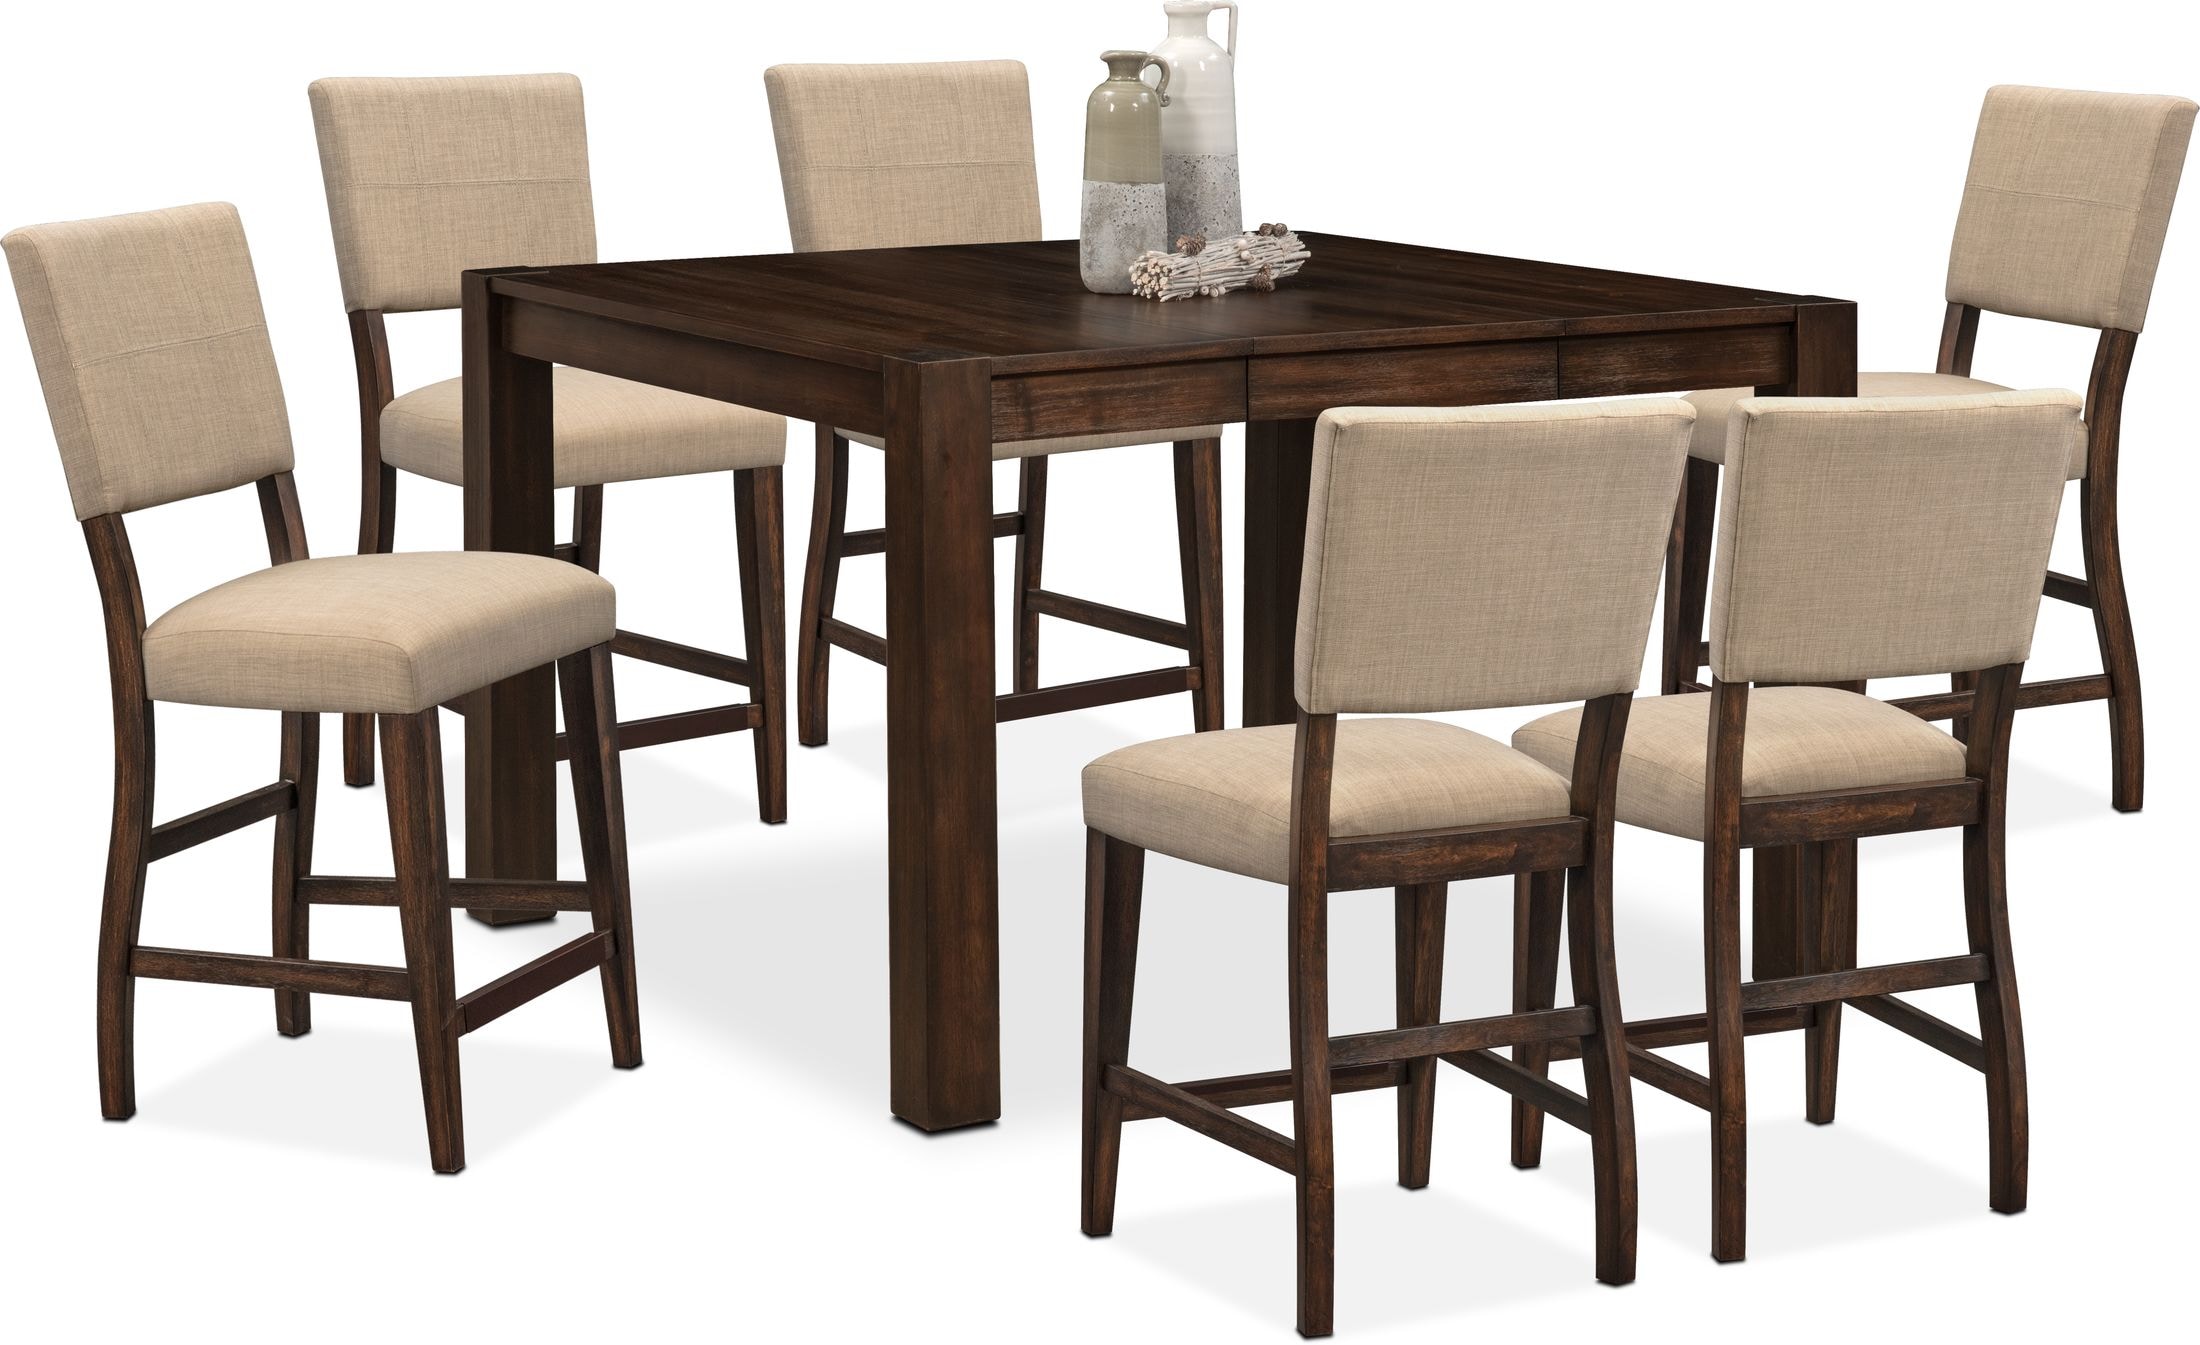 Undefined Value City Furniture, Value City Dining Room Table Chairs